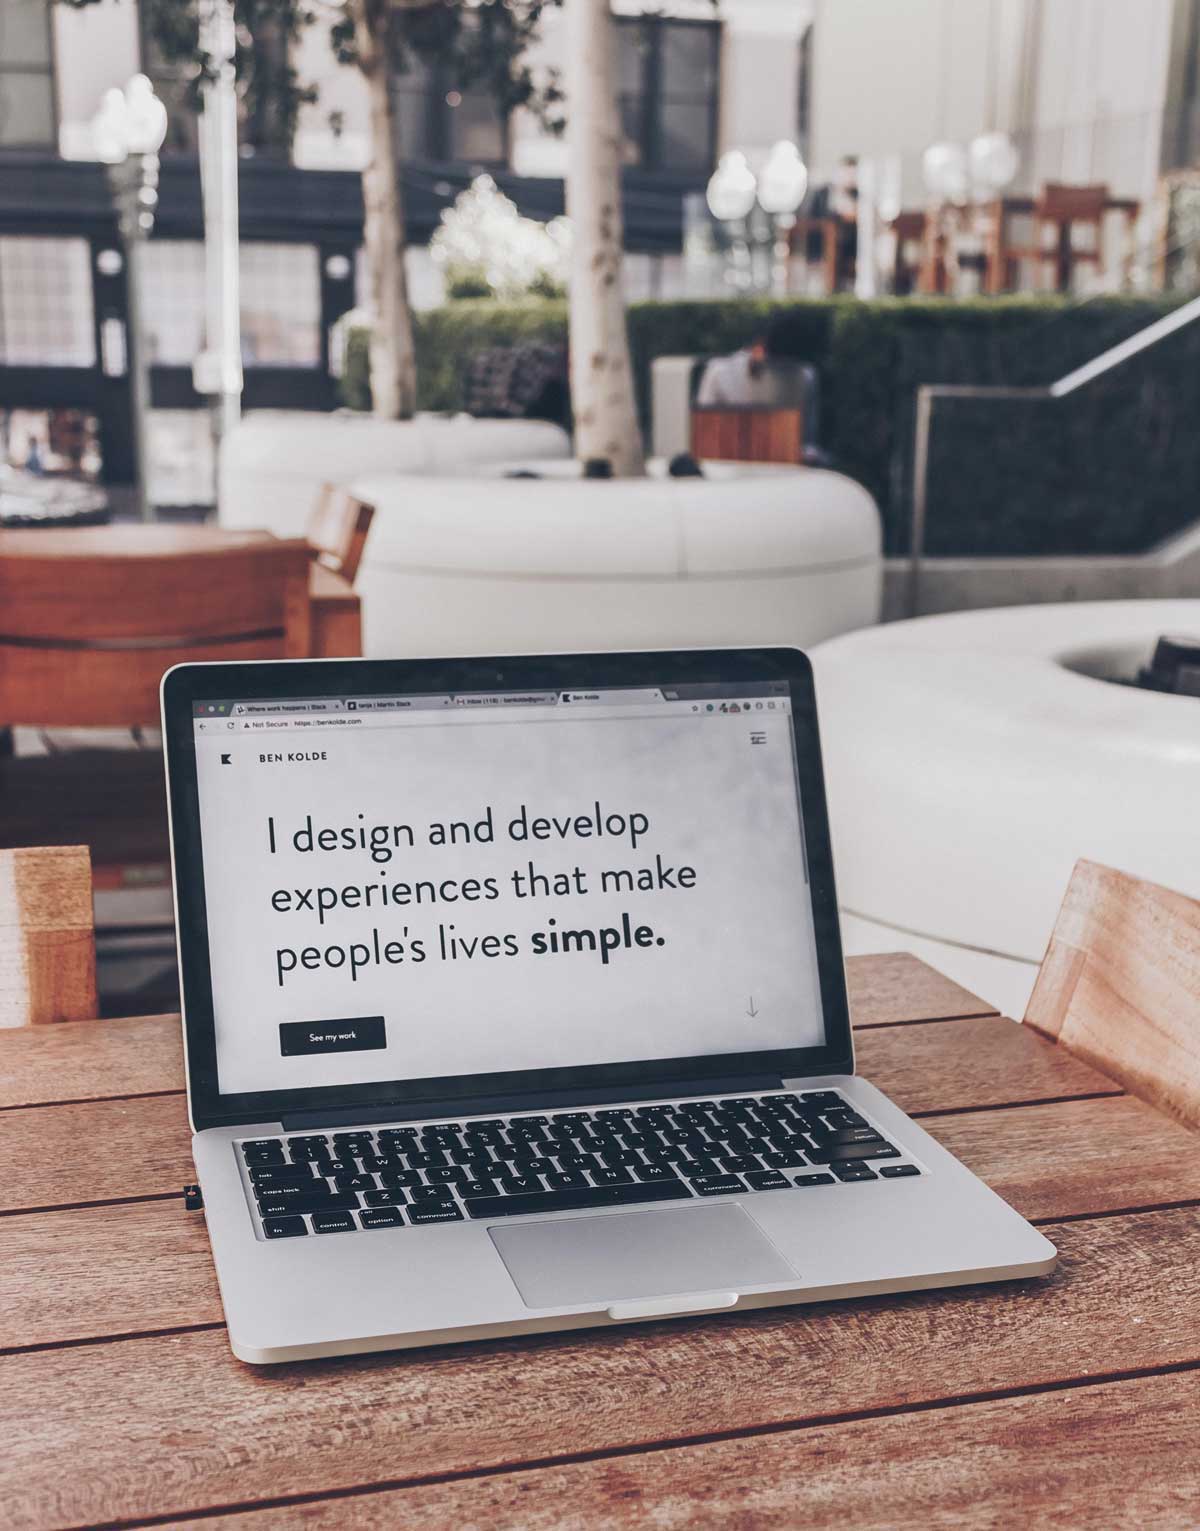  Laptop showing text reading the words "I design and develop experiences that make people's lives simple"